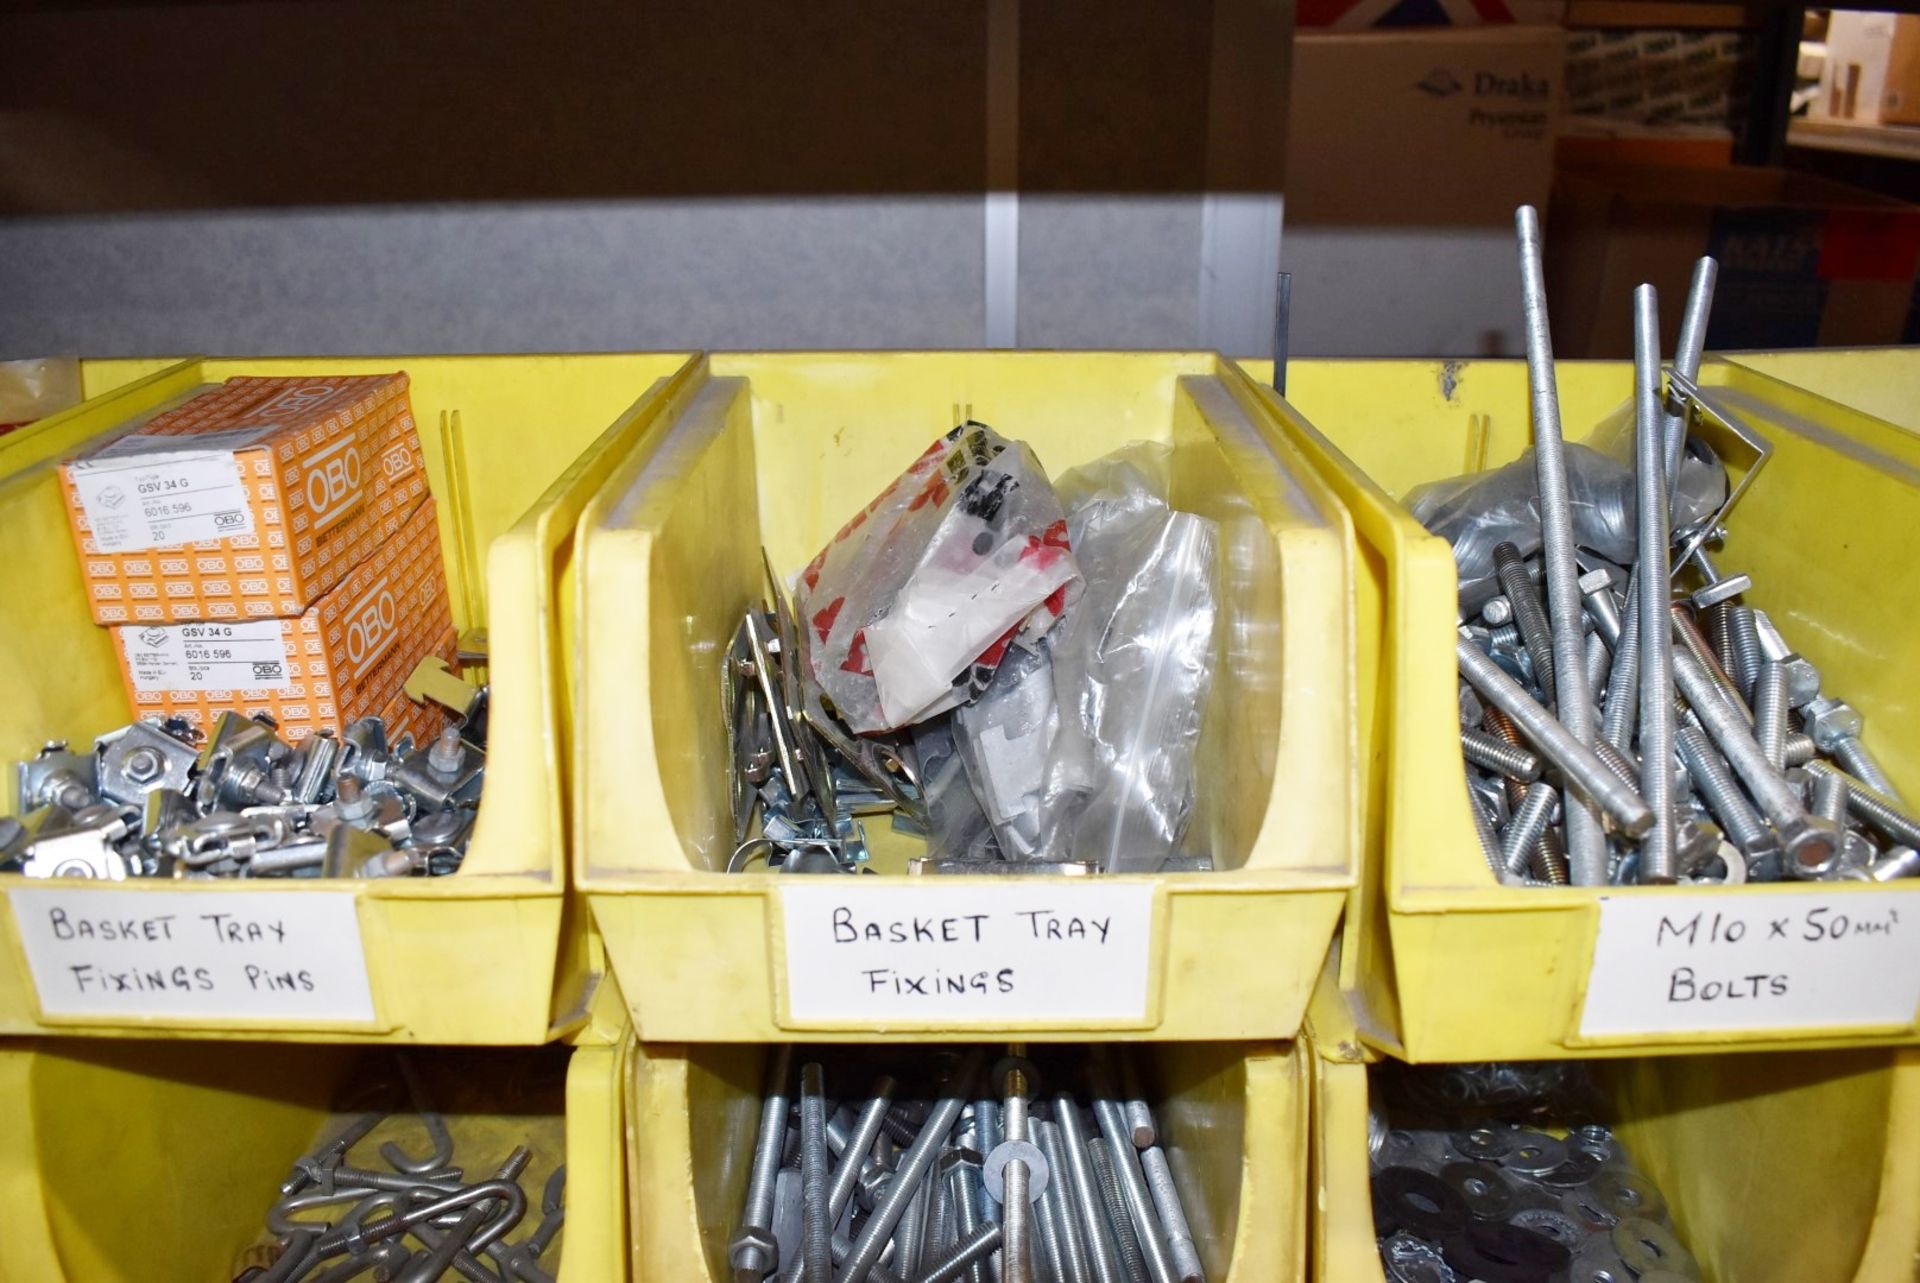 43 x Linbins With Contents - Clamps, Rod Connectors, Zebs, Washers, Bolts, Hex Nuts, Cleats & More! - Image 24 of 37